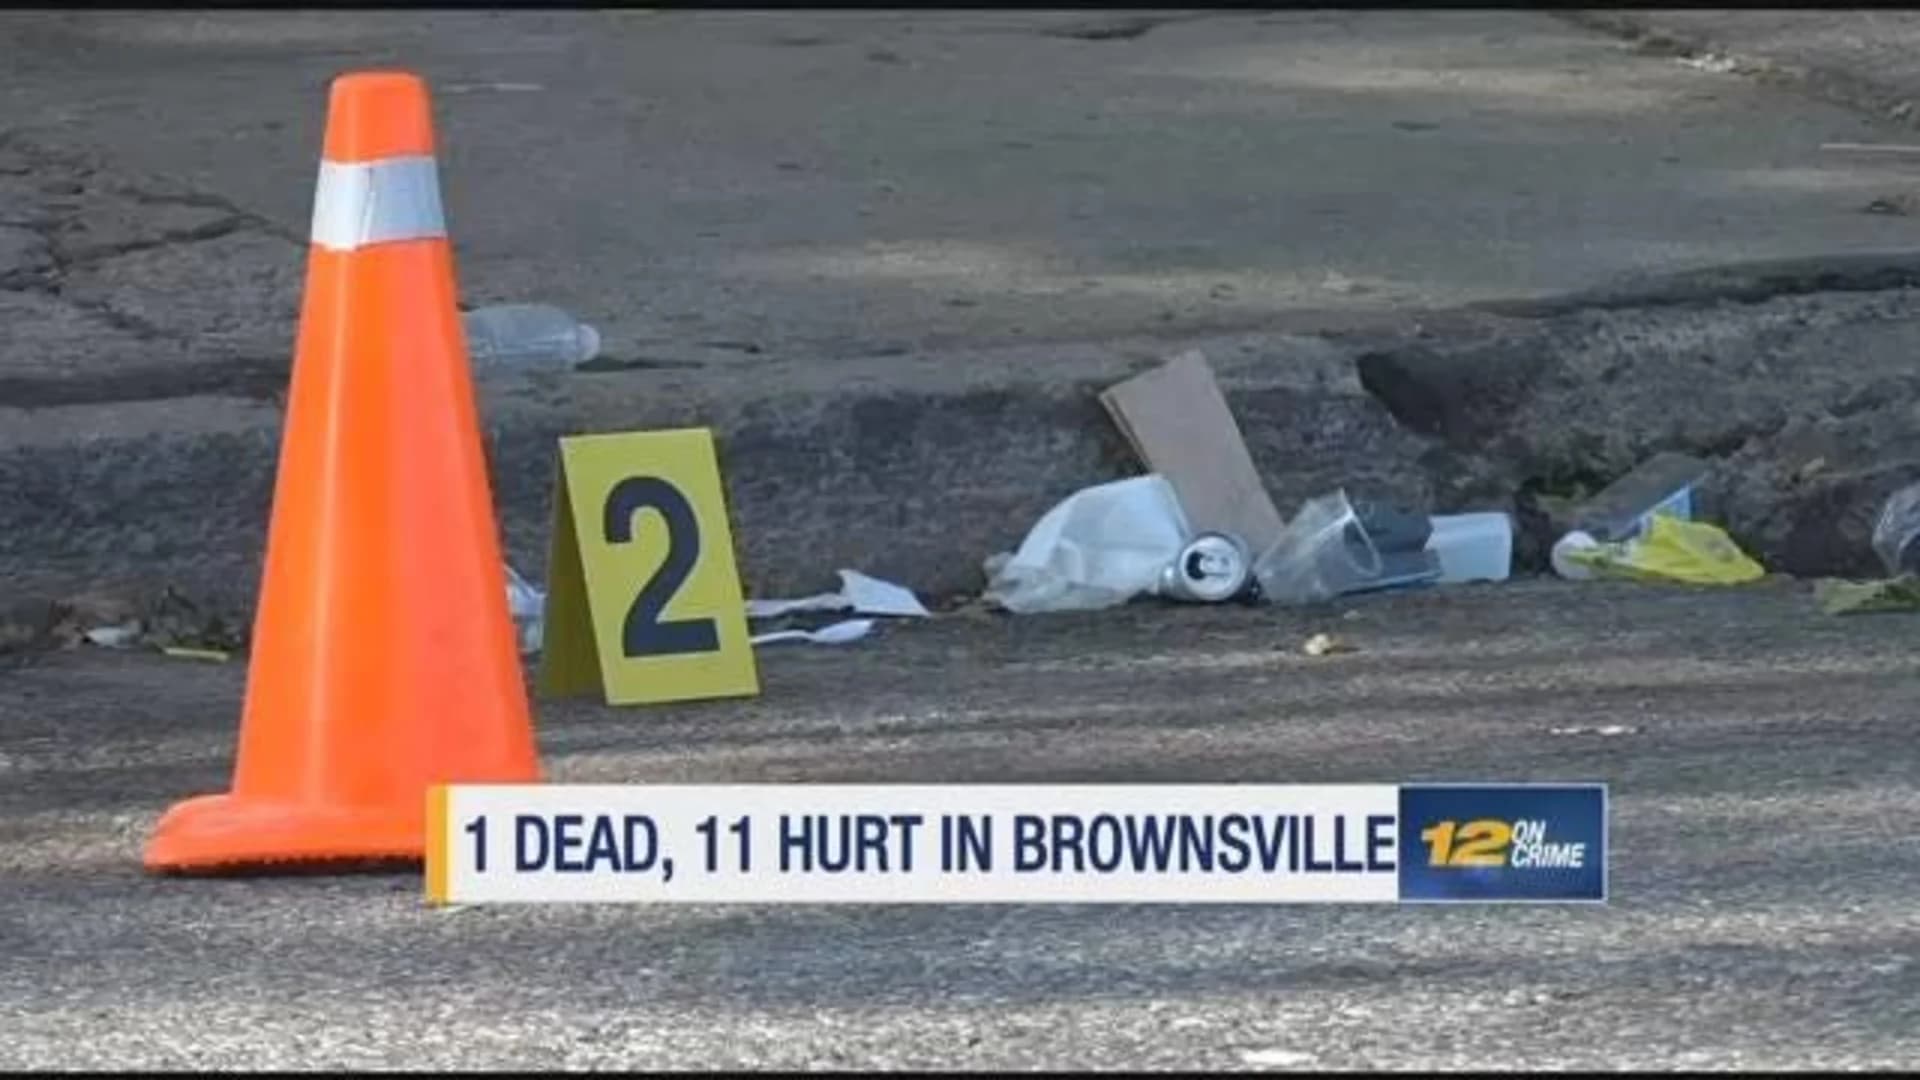 Police search for 2 people in connection to Brownsville shooting that killed 1, injured 11